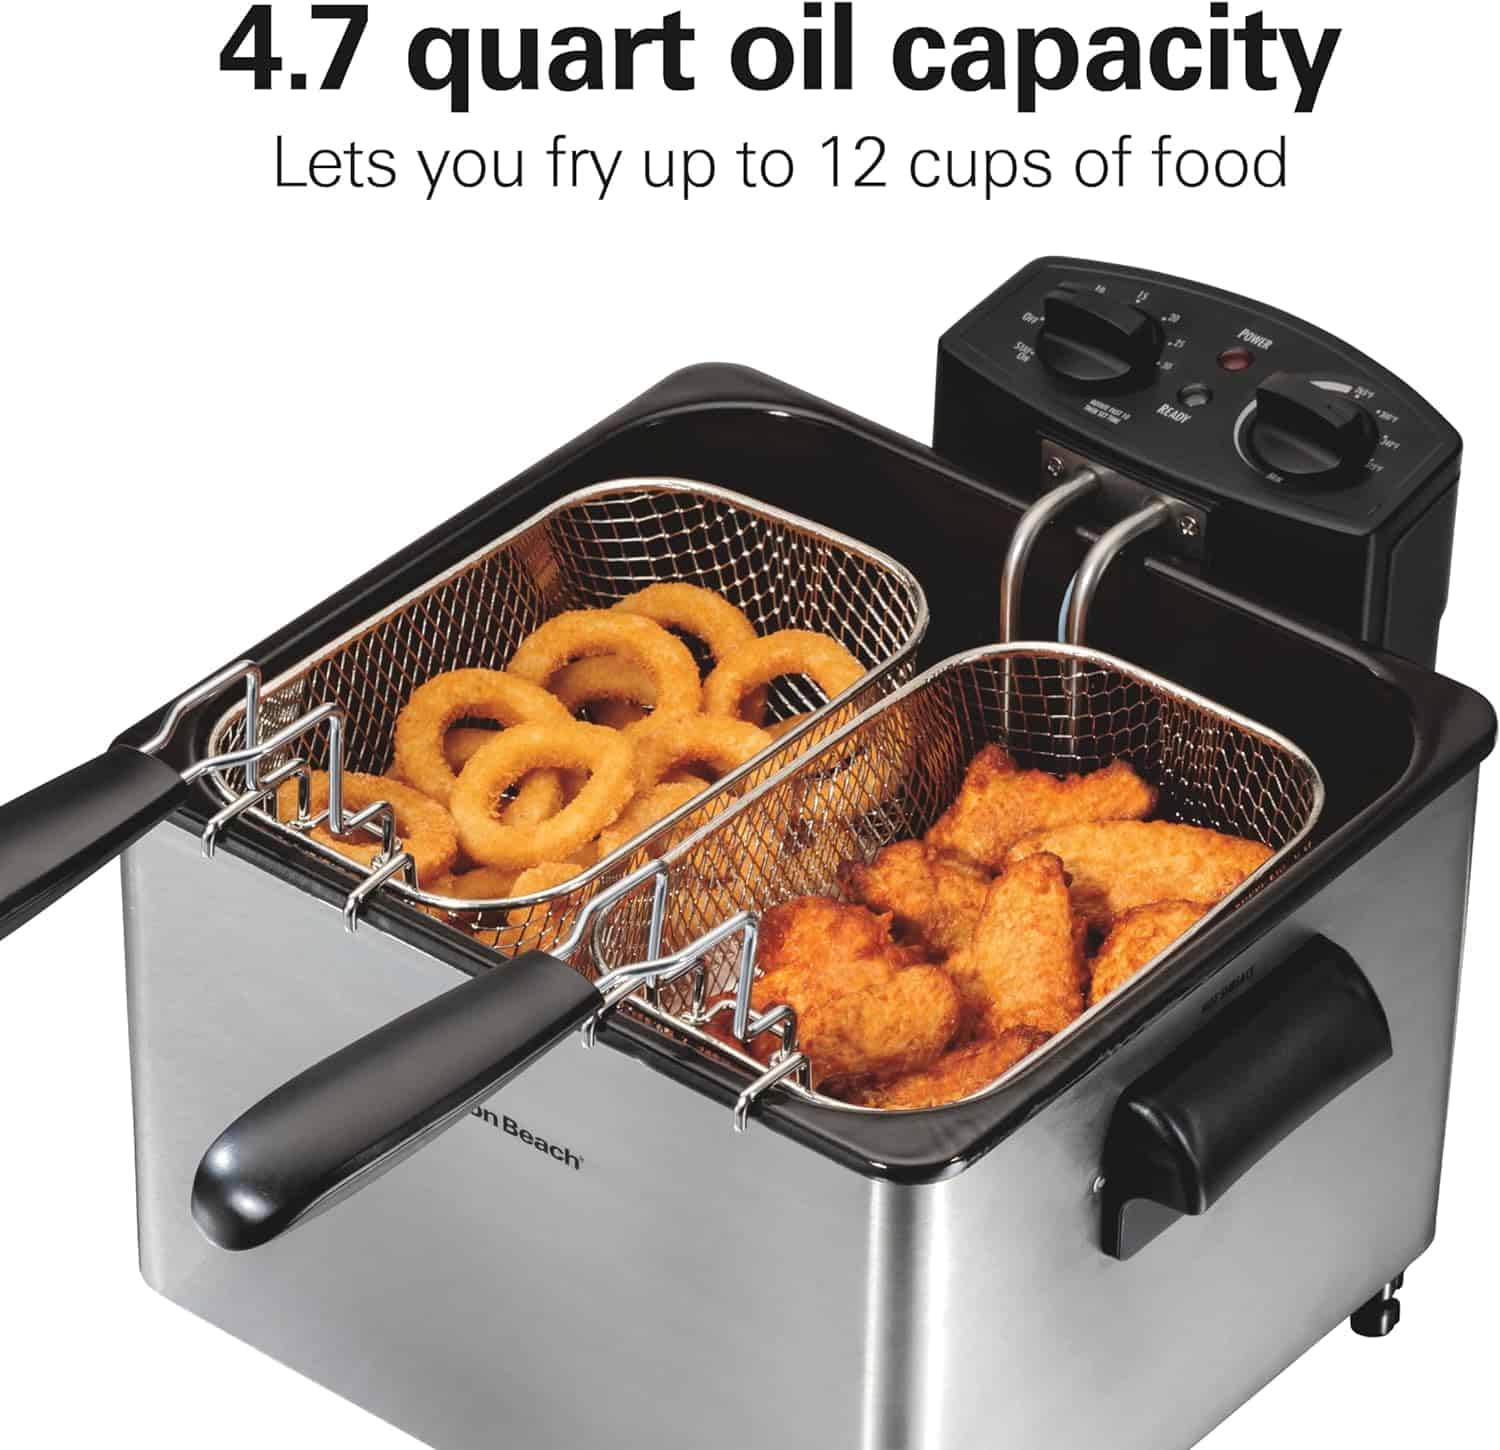 Hamilton-Beach-Deep-Fryer-with-2-Frying-Baskets-19-Cups-4.5-Liters-Oil-Capacity-Lid-with-View-Window-Professional-Style-Electric-1800-Watts-Stainless-Steel-35036